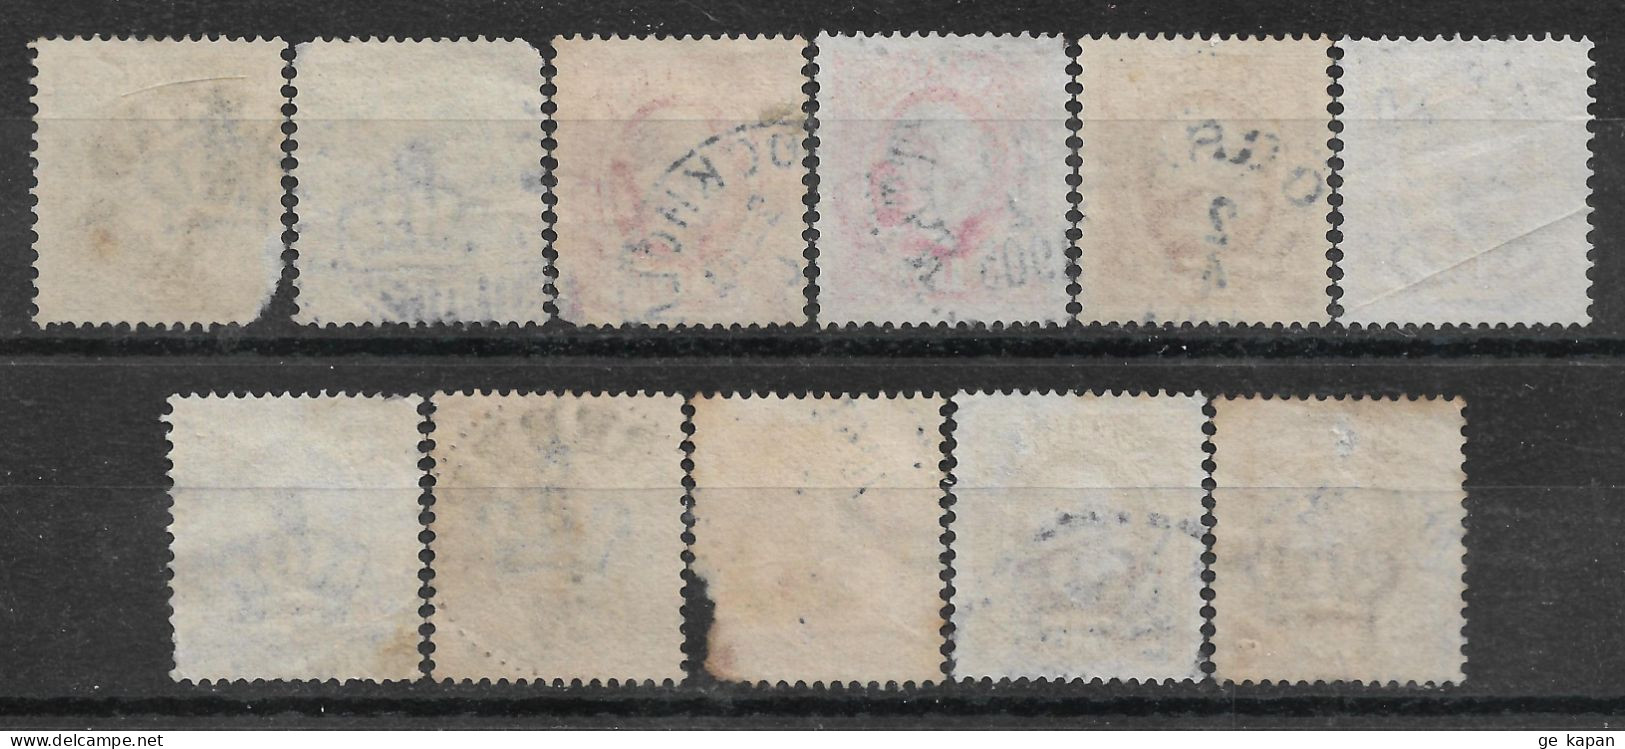 1891-1897 SWEDEN Set Of 11 Used Stamps (Michel # 41a,41b,43,44,45b,46,47) - Used Stamps